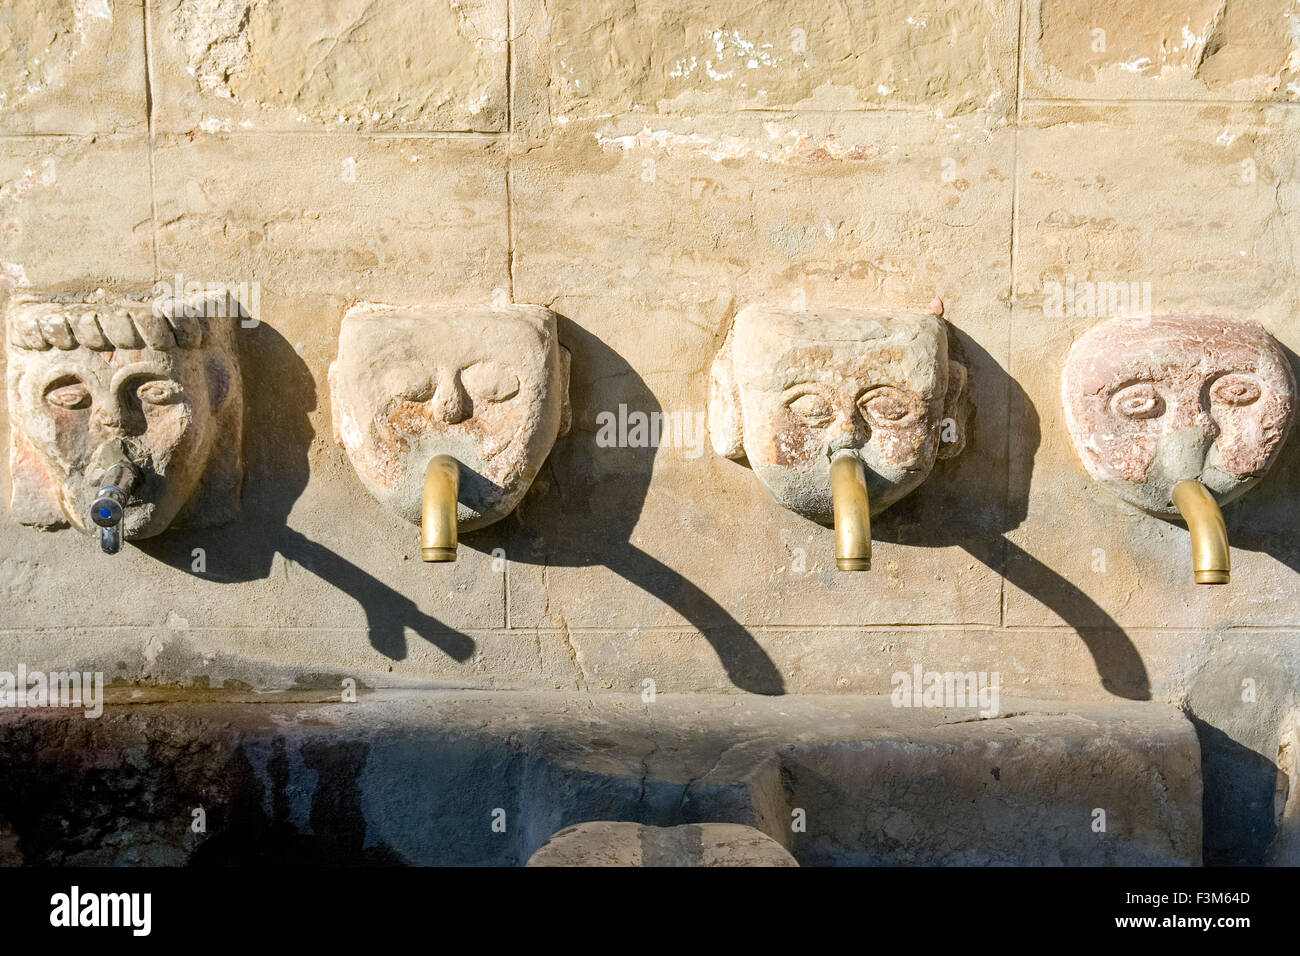 Agua Potable (Drinking water) fountains in village in Spain Stock Photo